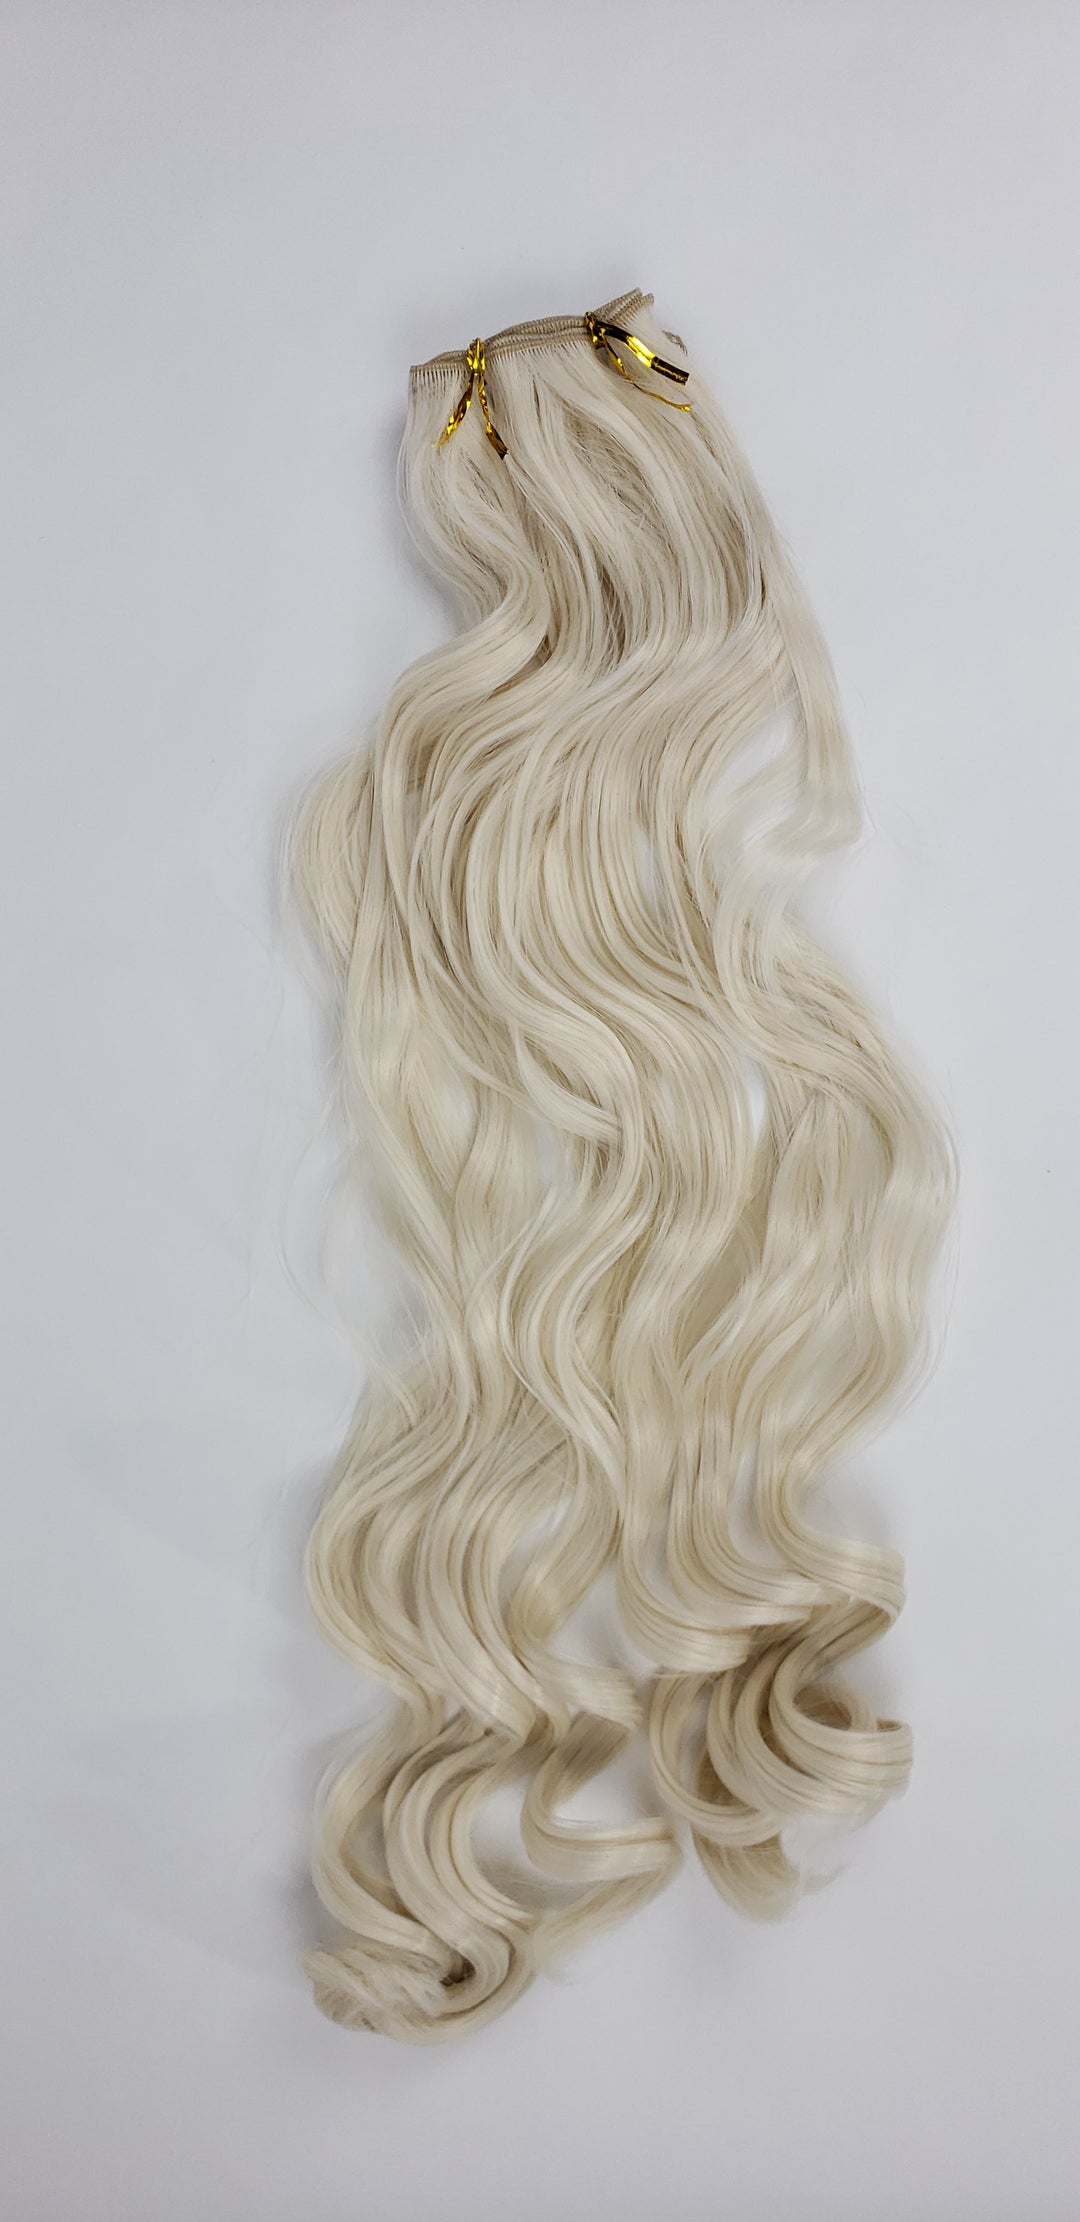 Pose Wigs White Blonde 26" Long Curly Synthetic Hair - Loose Sew-in Wefting